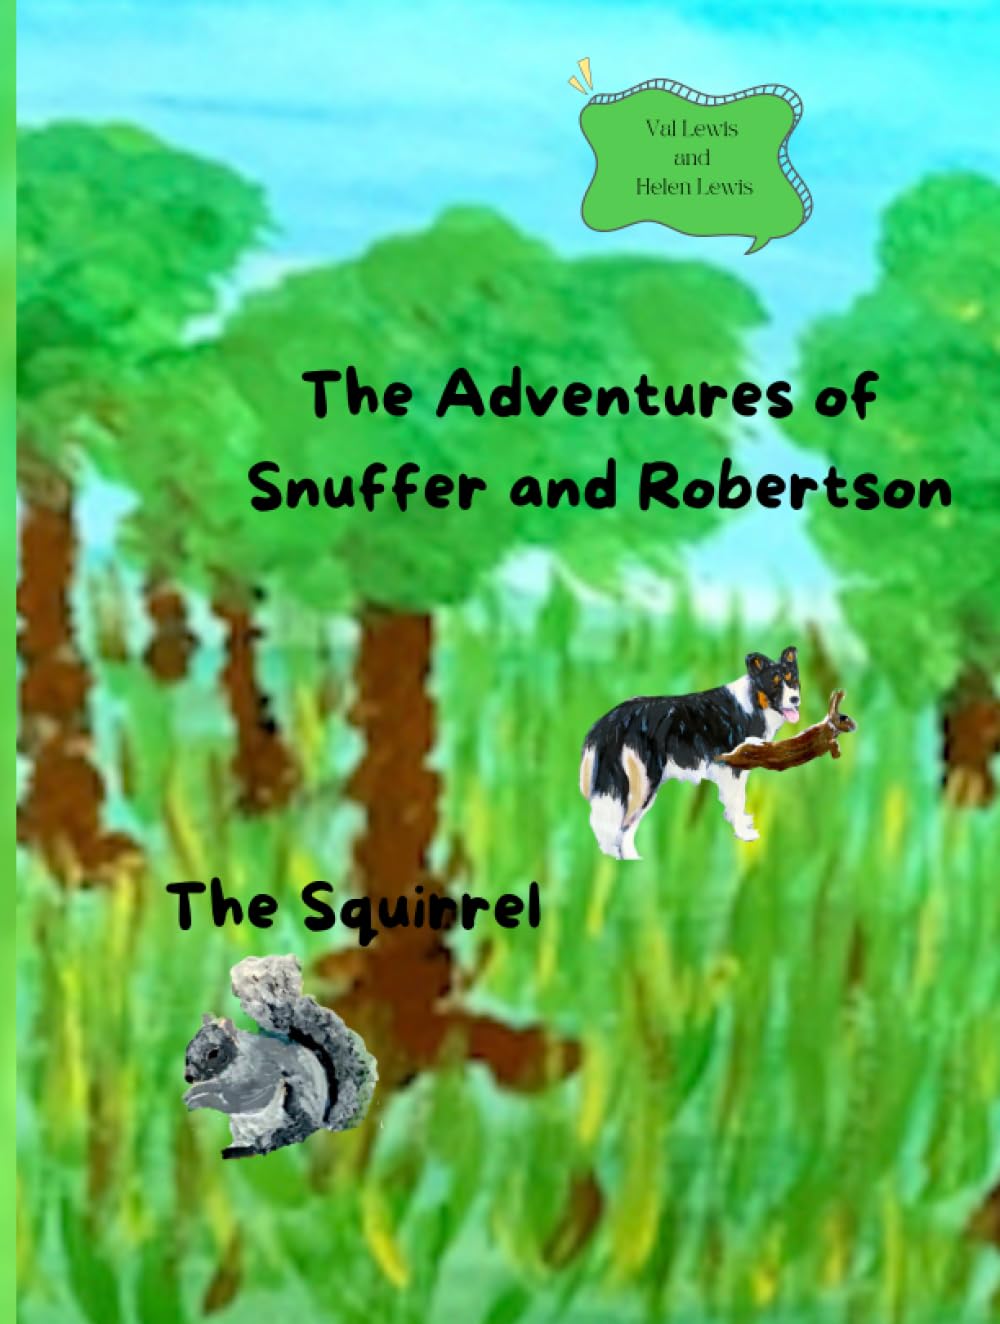 Snuffer-and-Robertson-cover-image